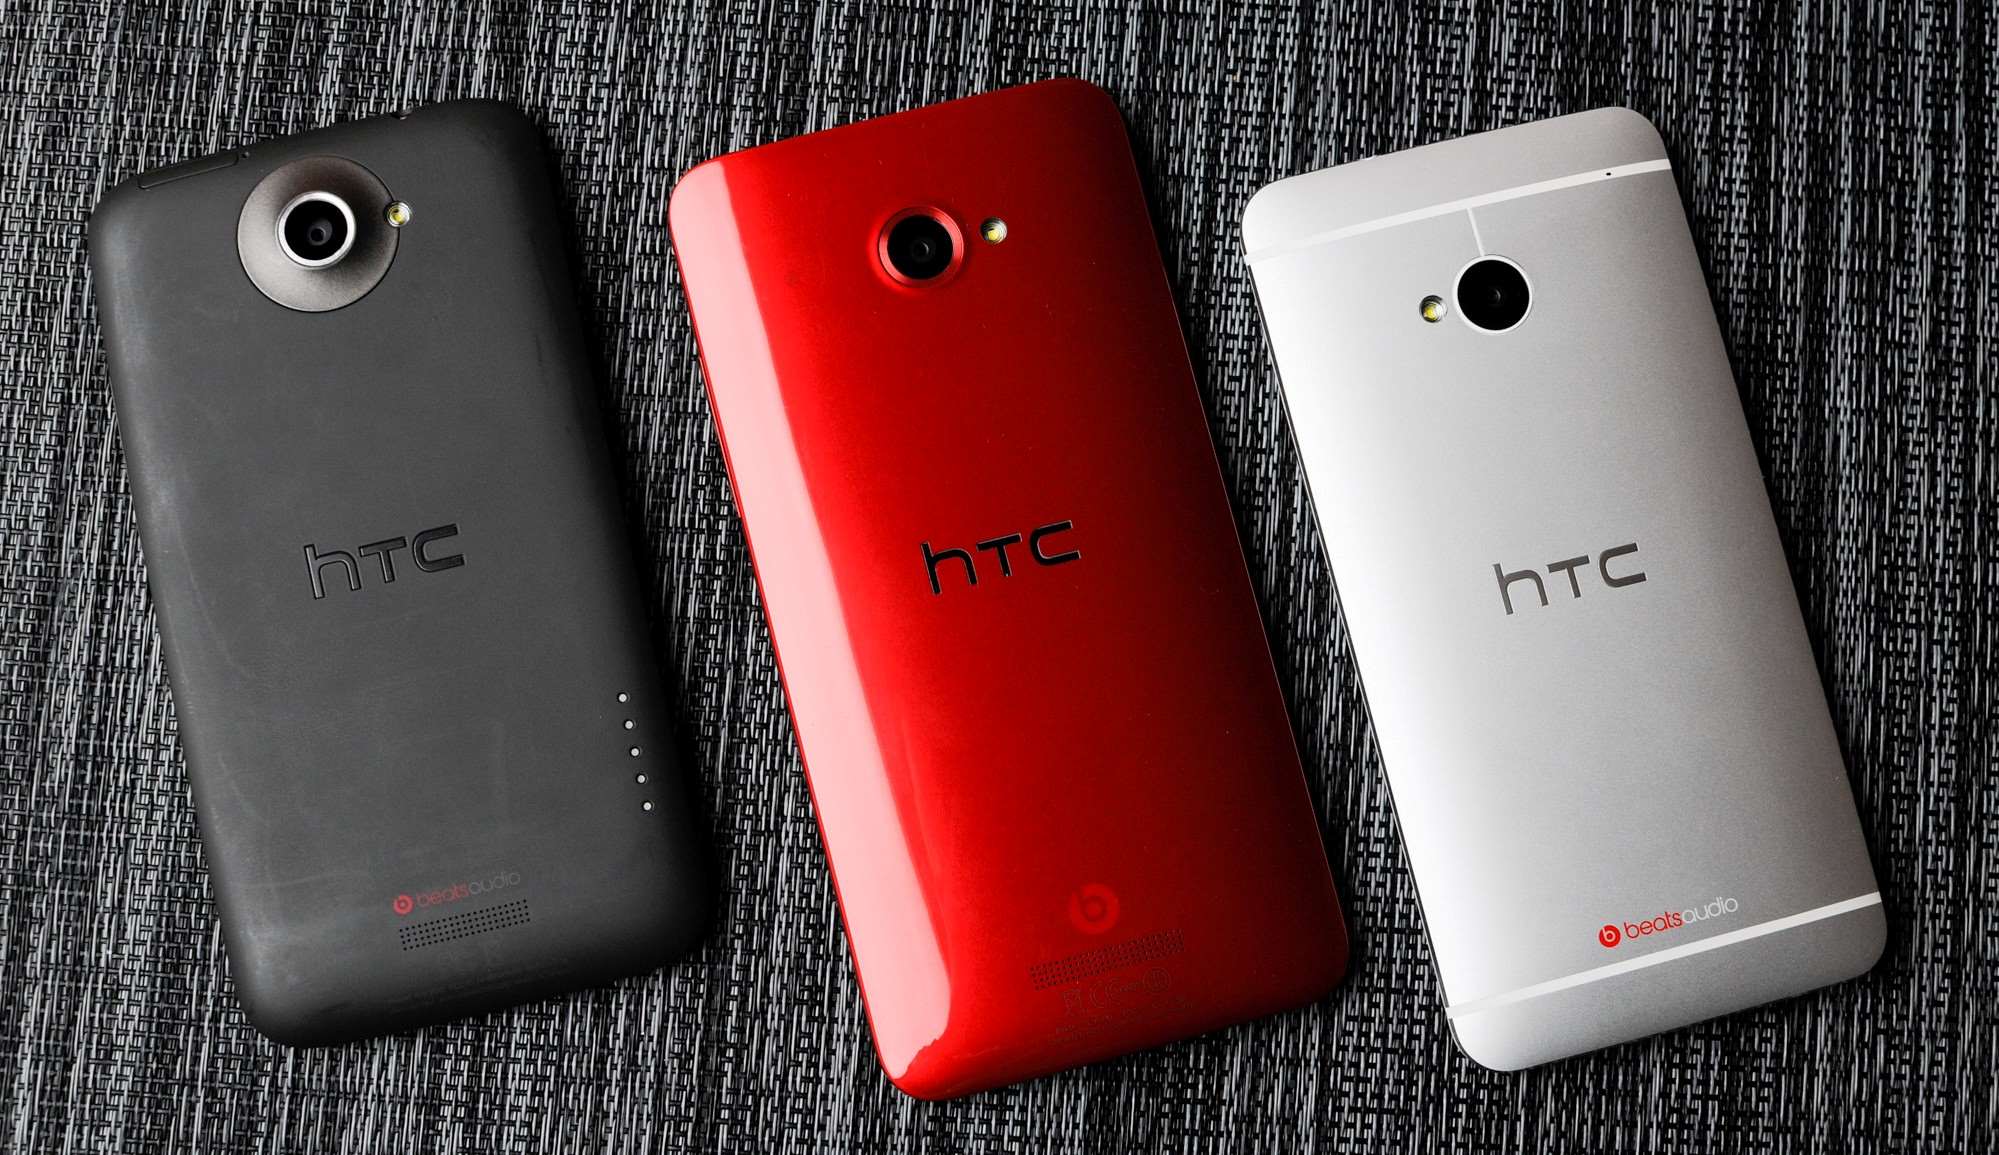 HTC One Phones: What You Need To Know